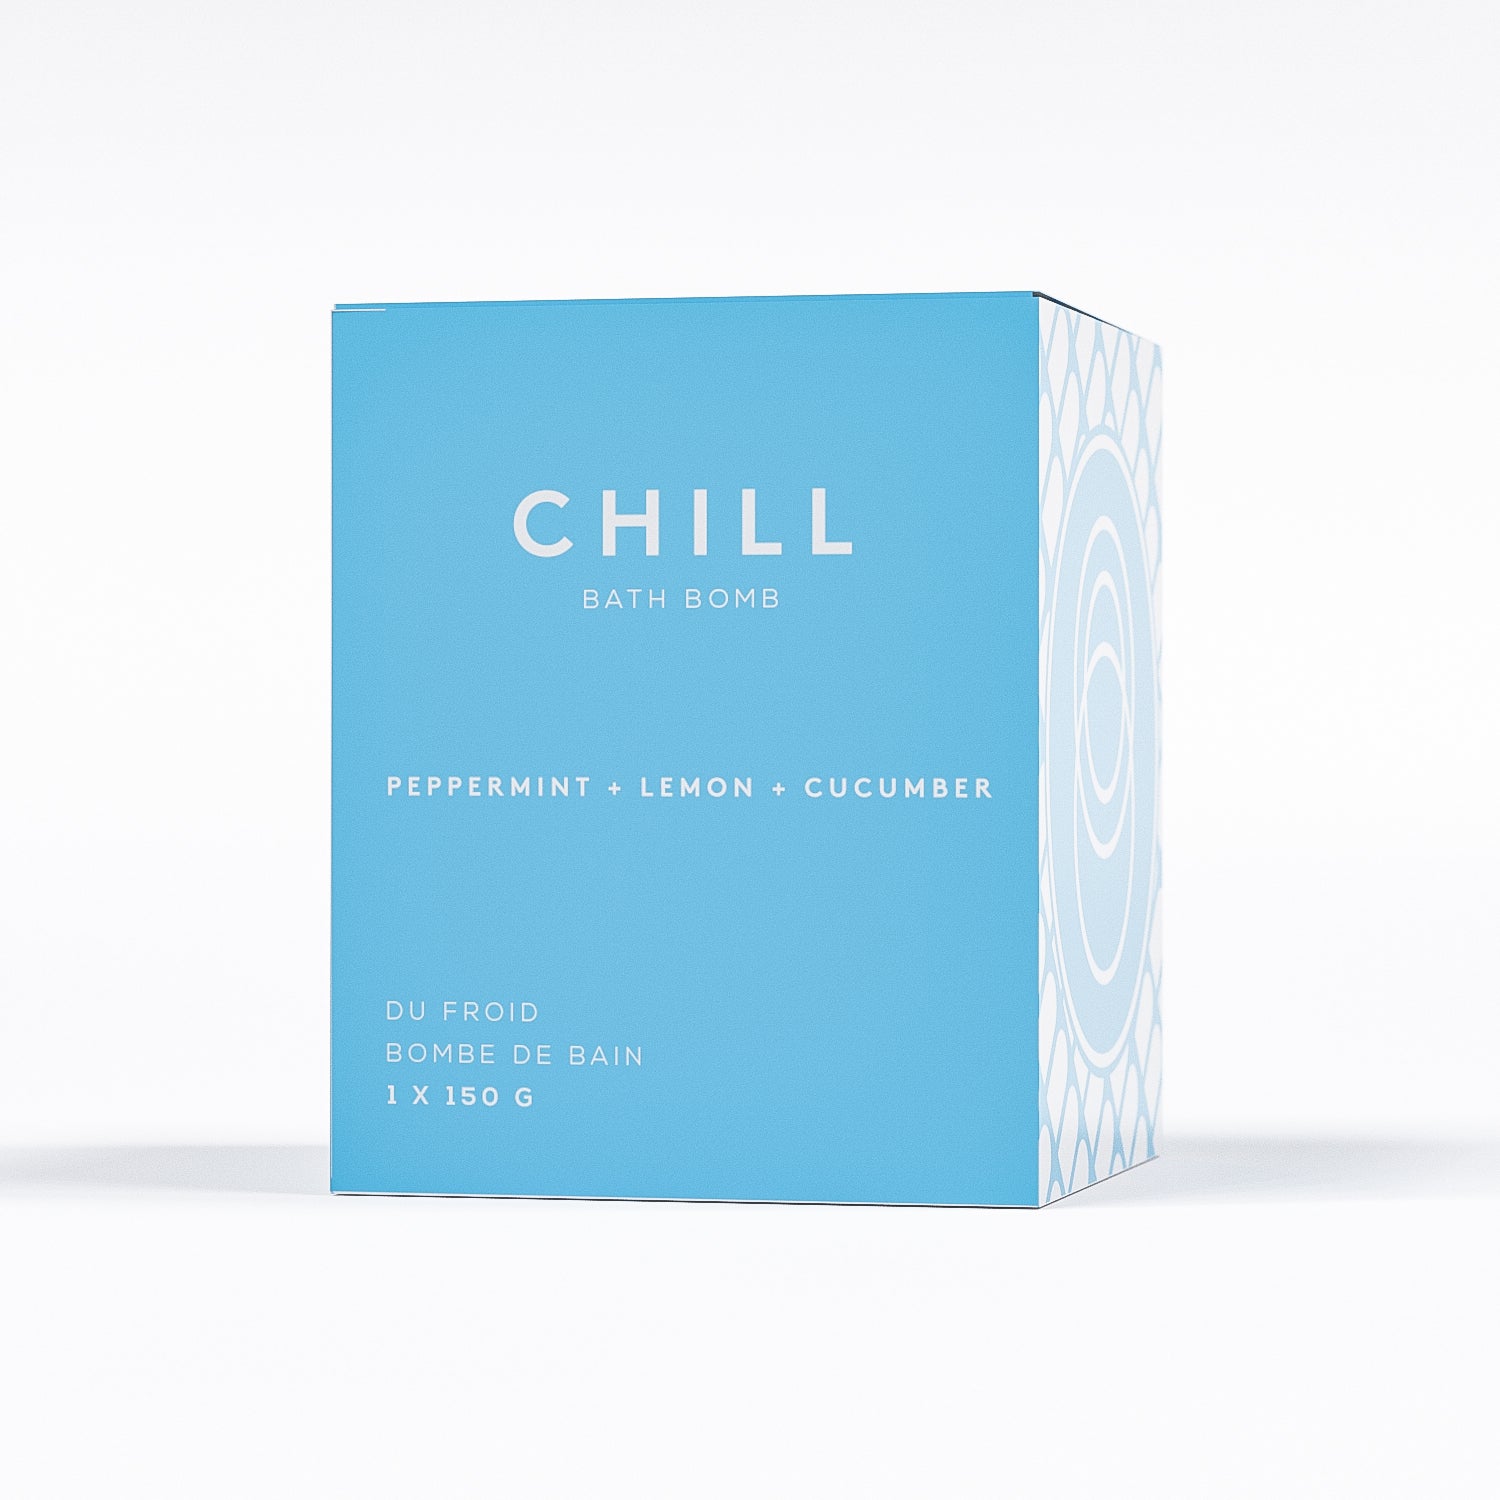 chill peppermint bath bomb in blue square box by bare skin bar